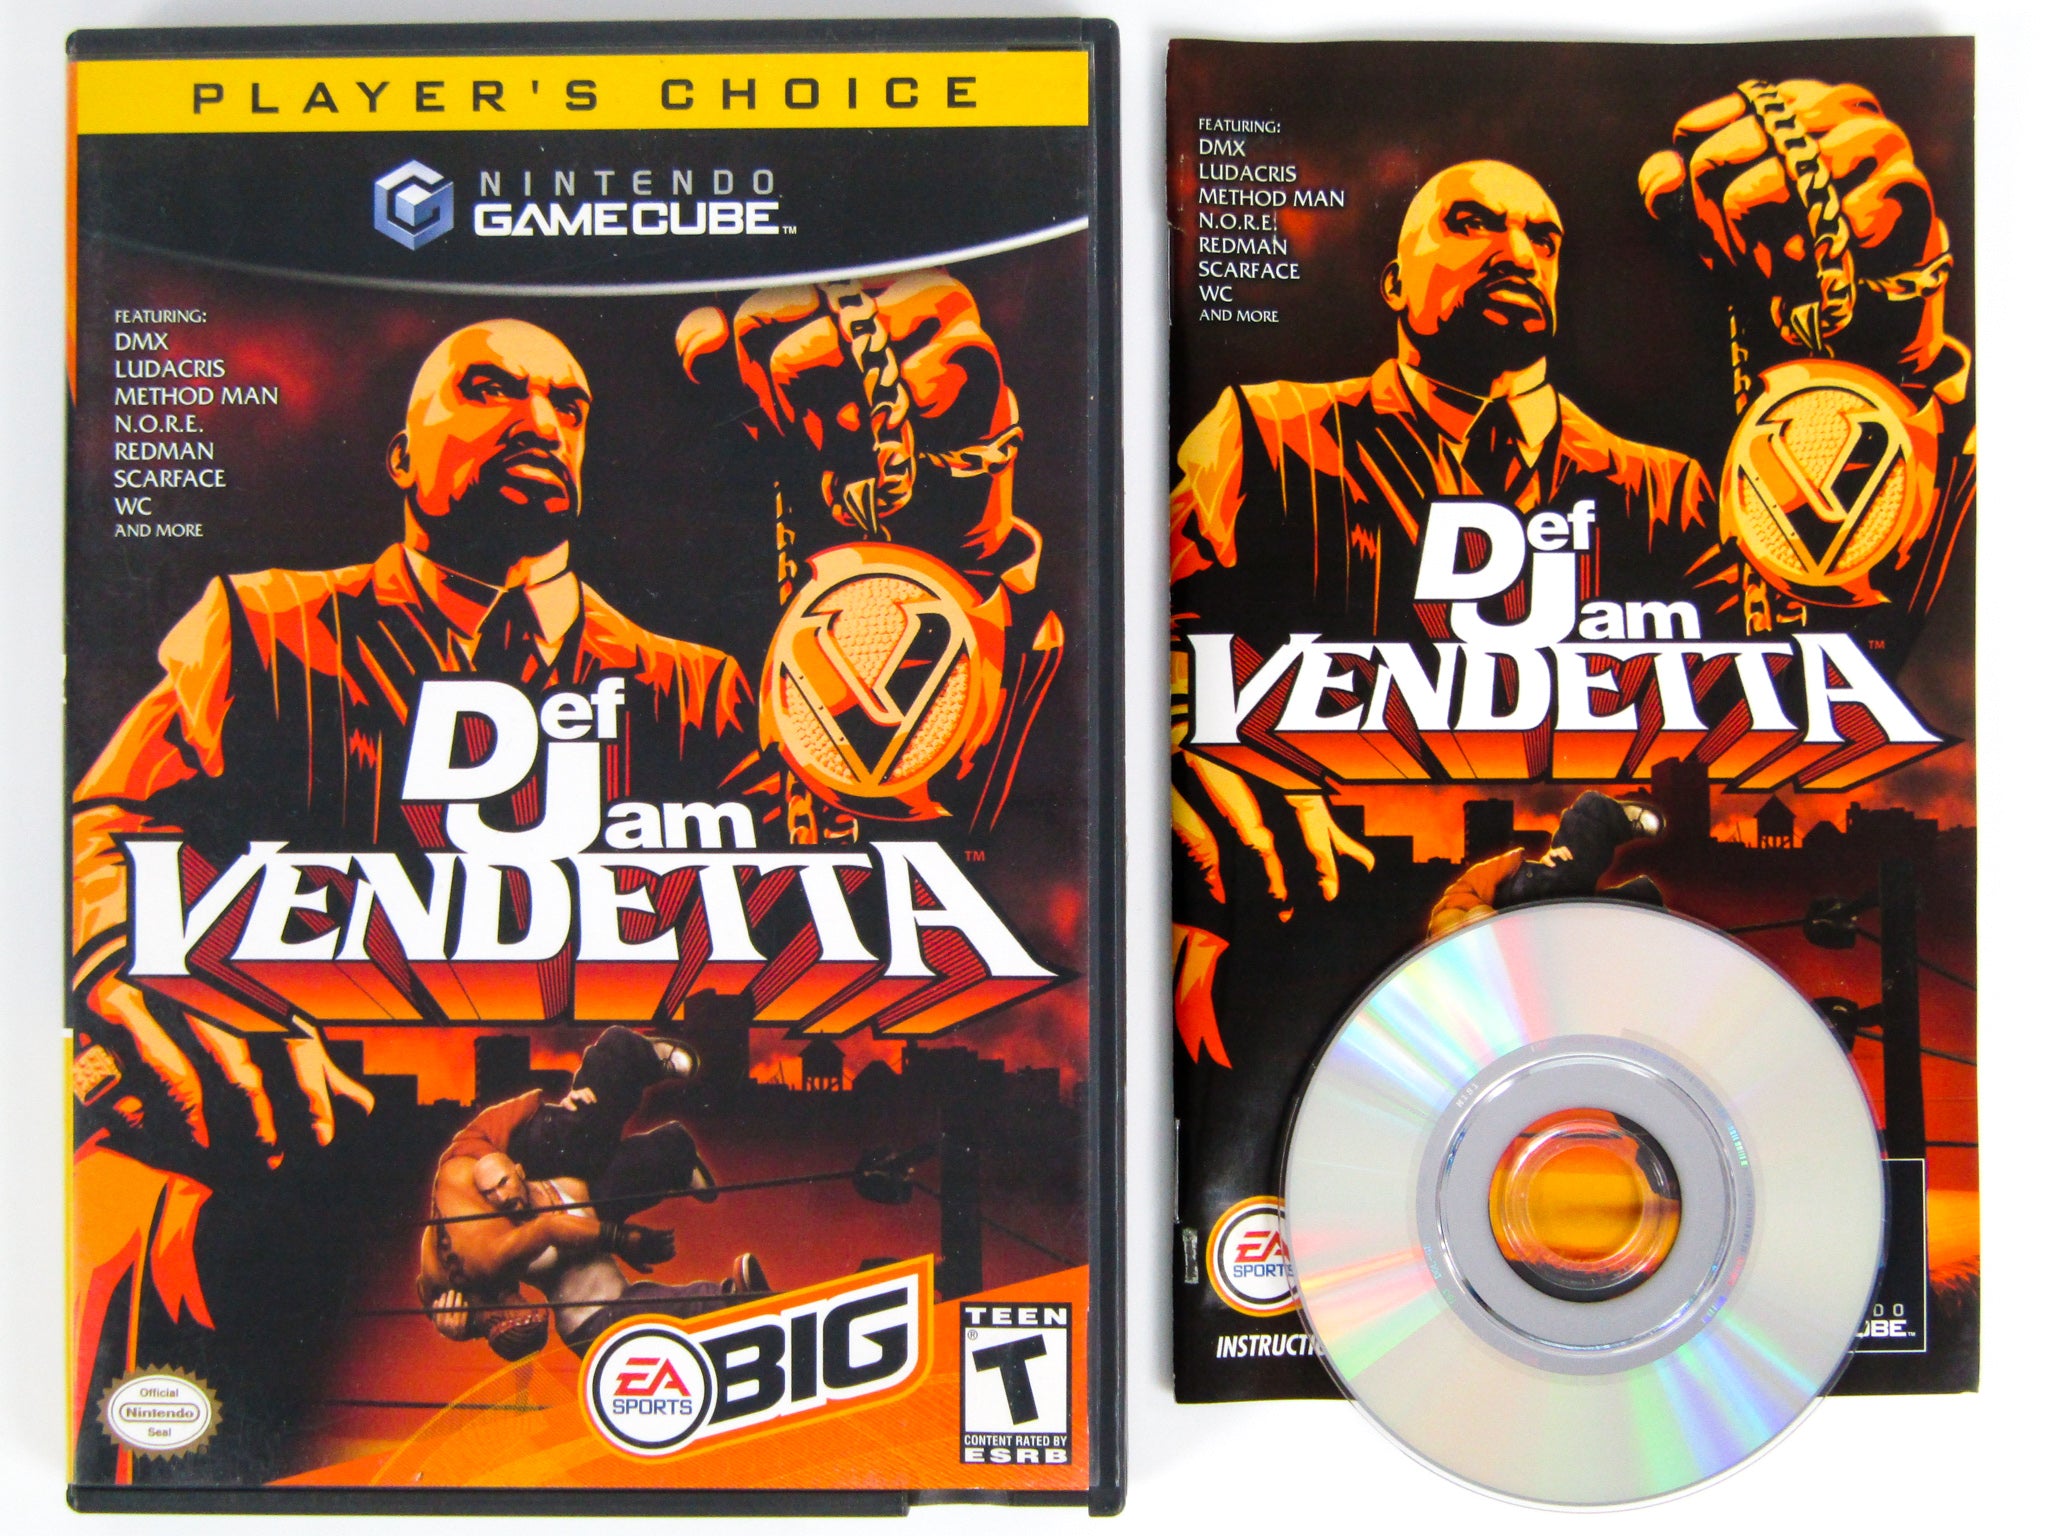 Def Jam Vendetta - cube - Walkthrough and Guide - Page 6 - GameSpy